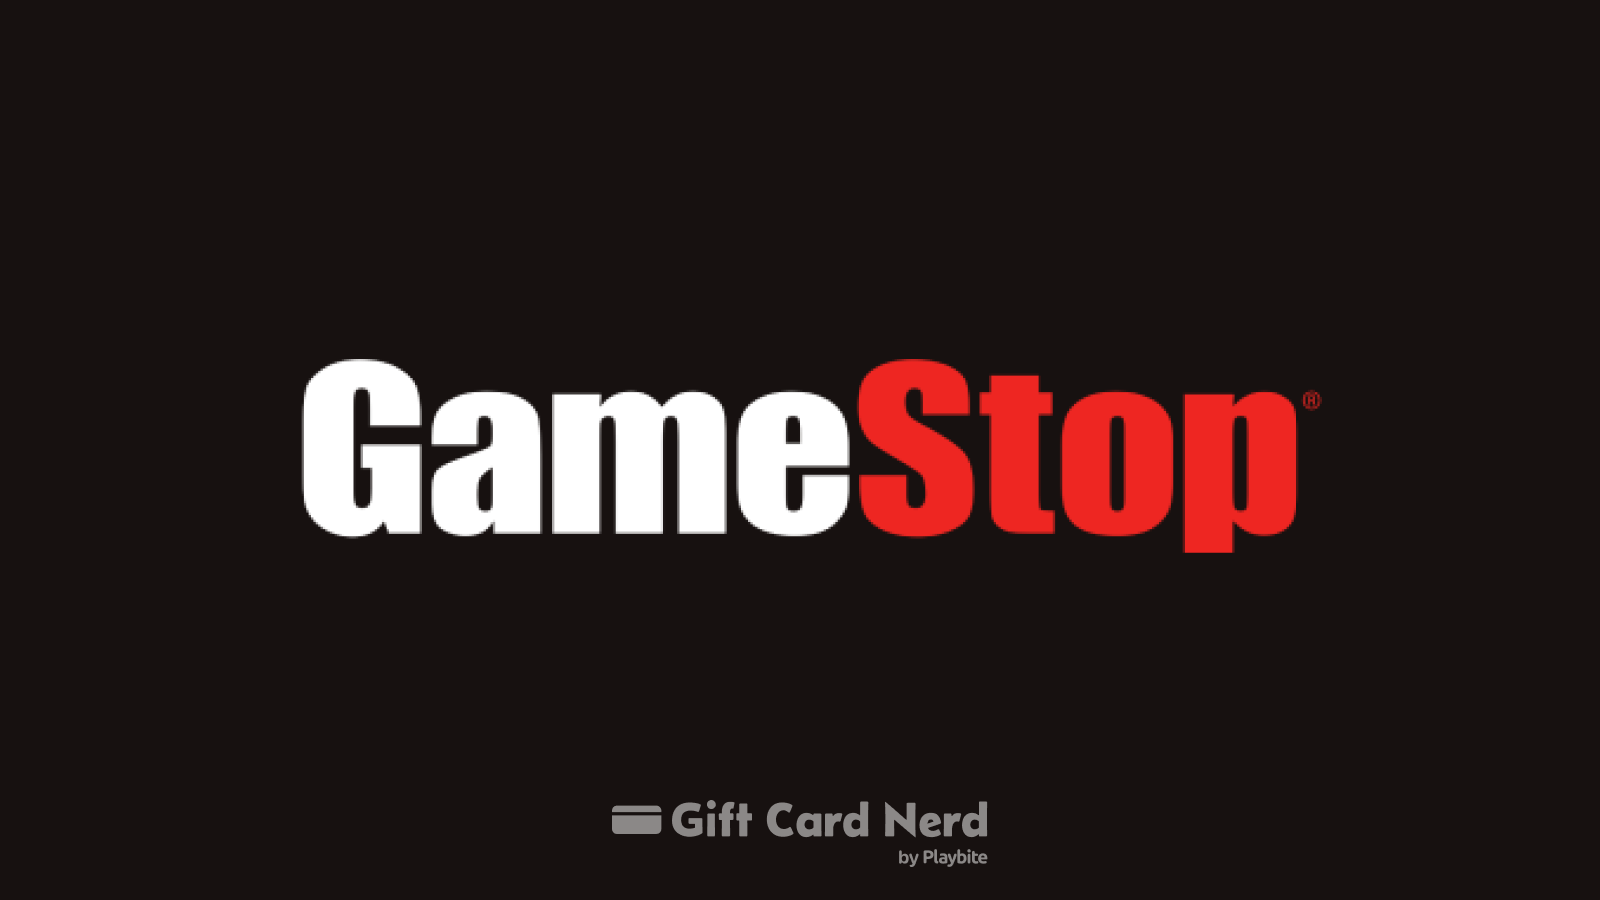 Does Walgreens Sell GameStop Gift Cards?